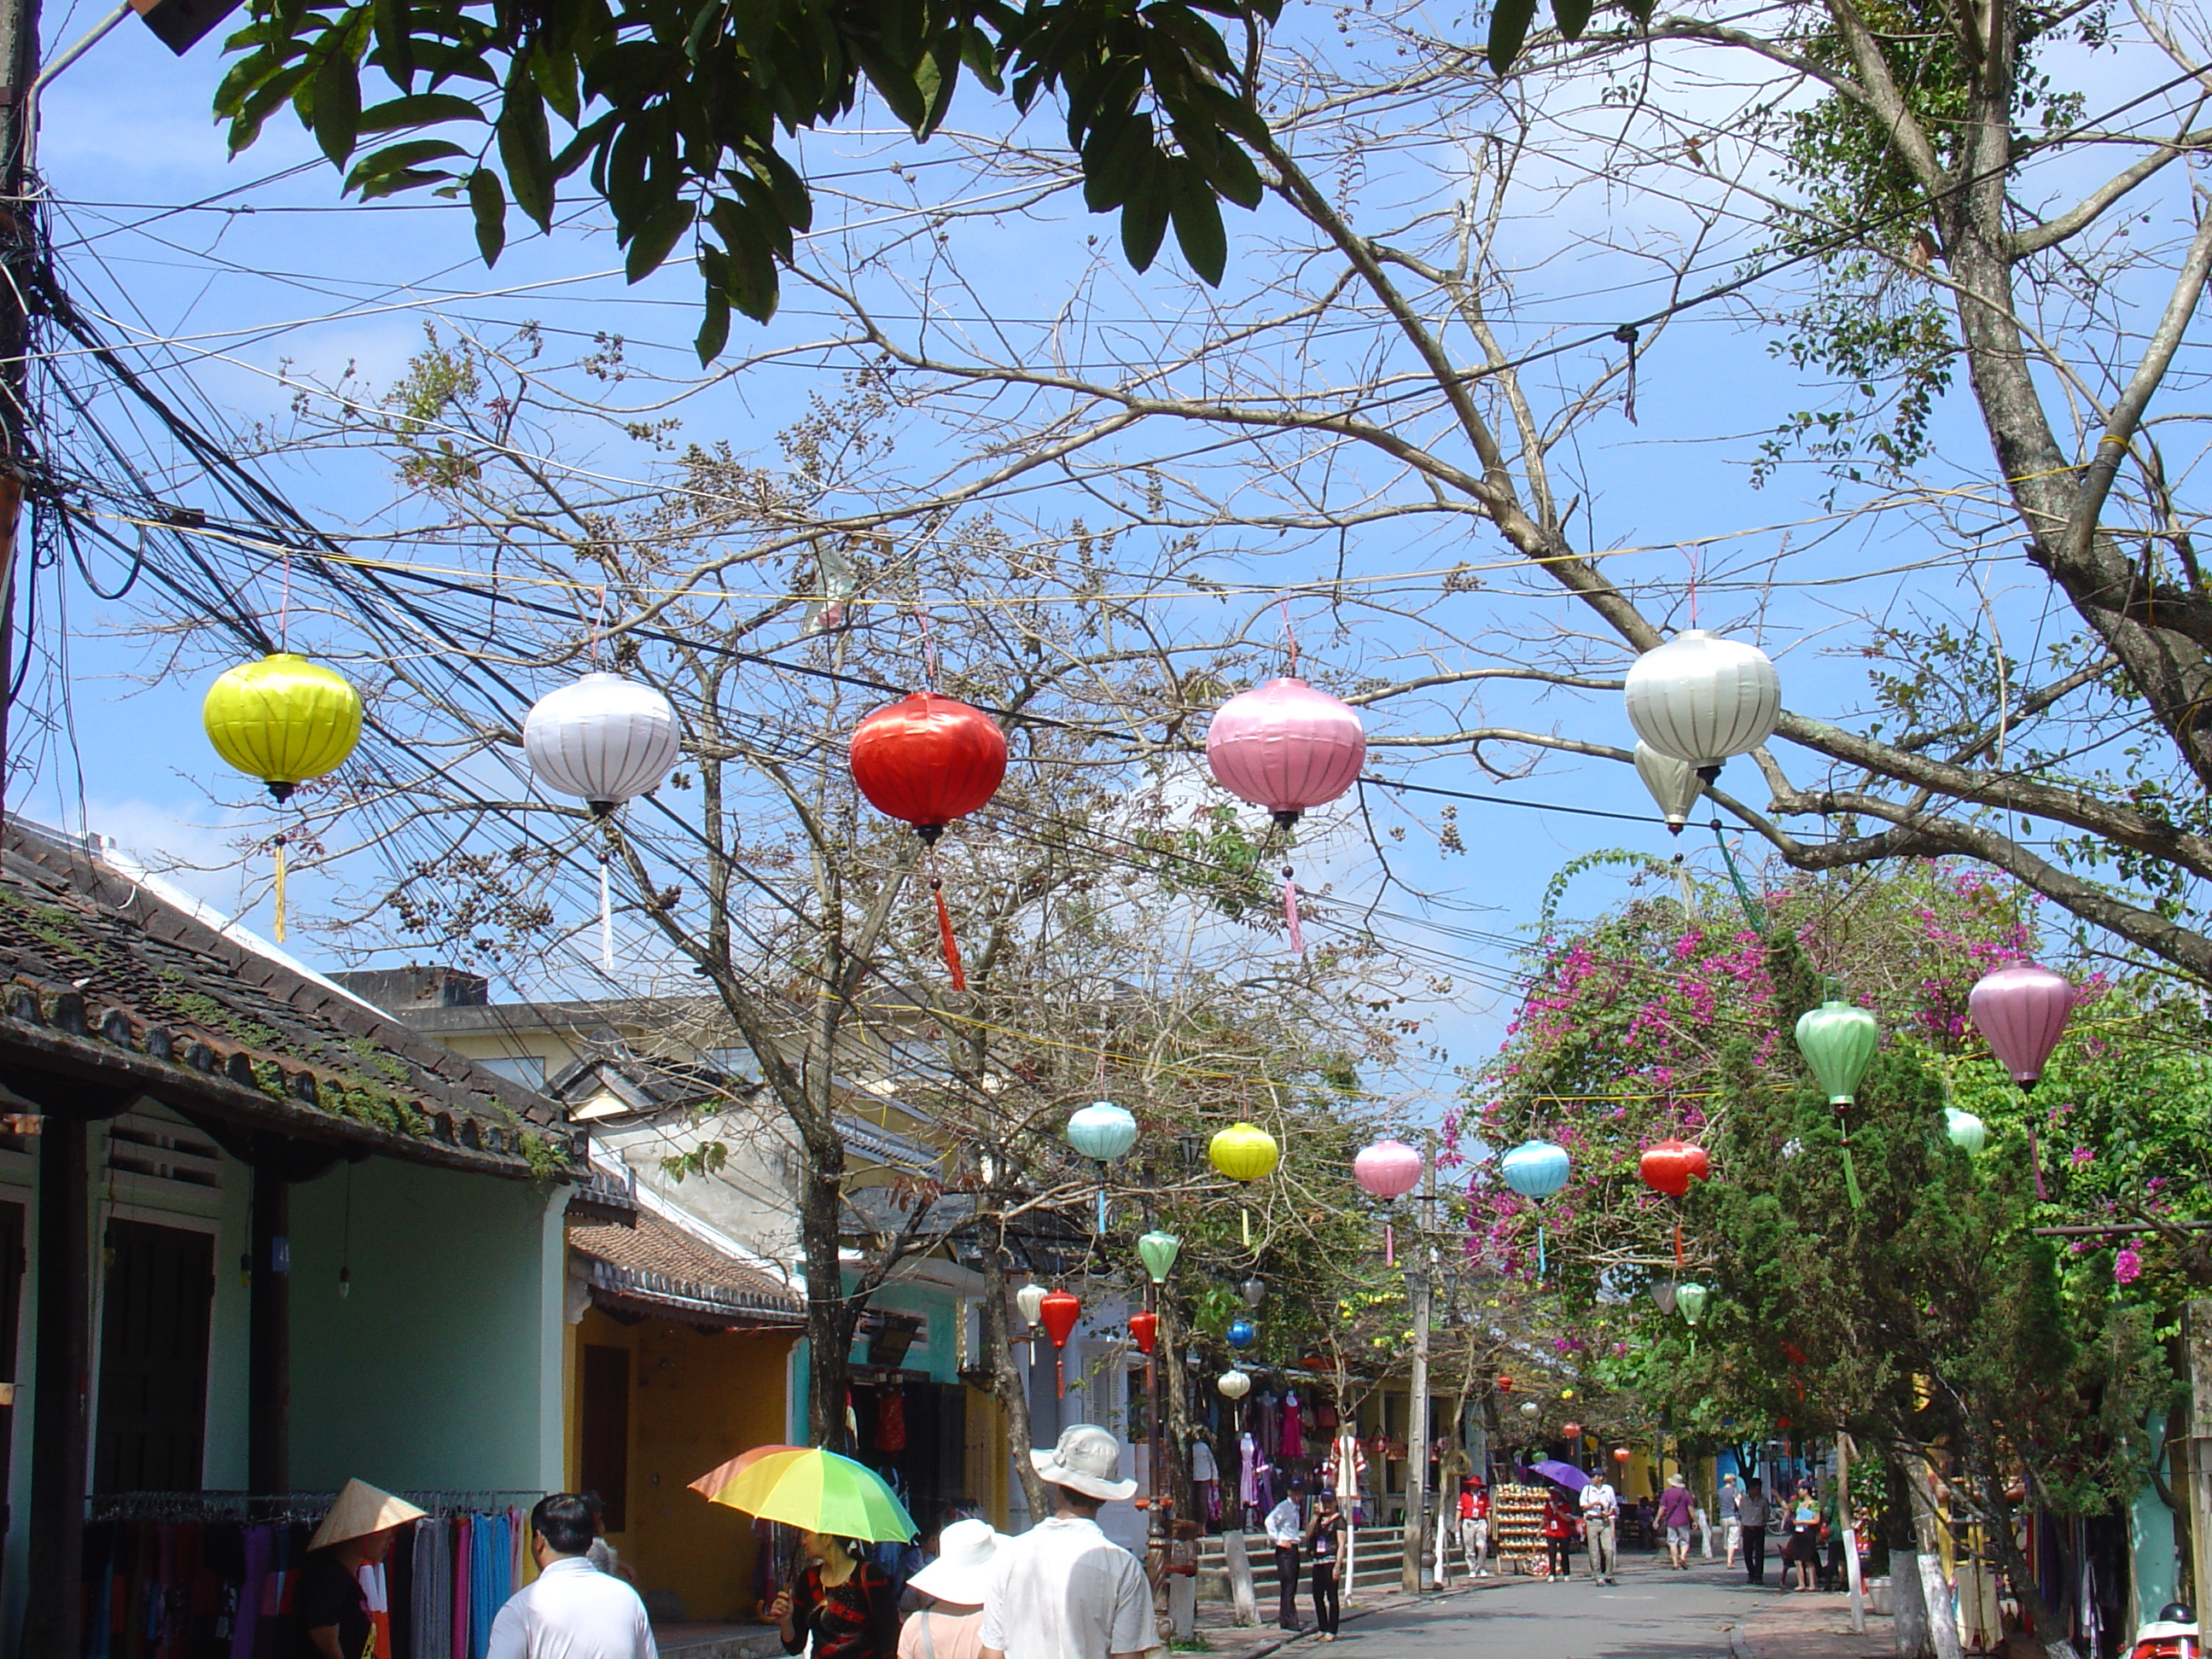 Lanterns decorating the old quarter of Hoi An.